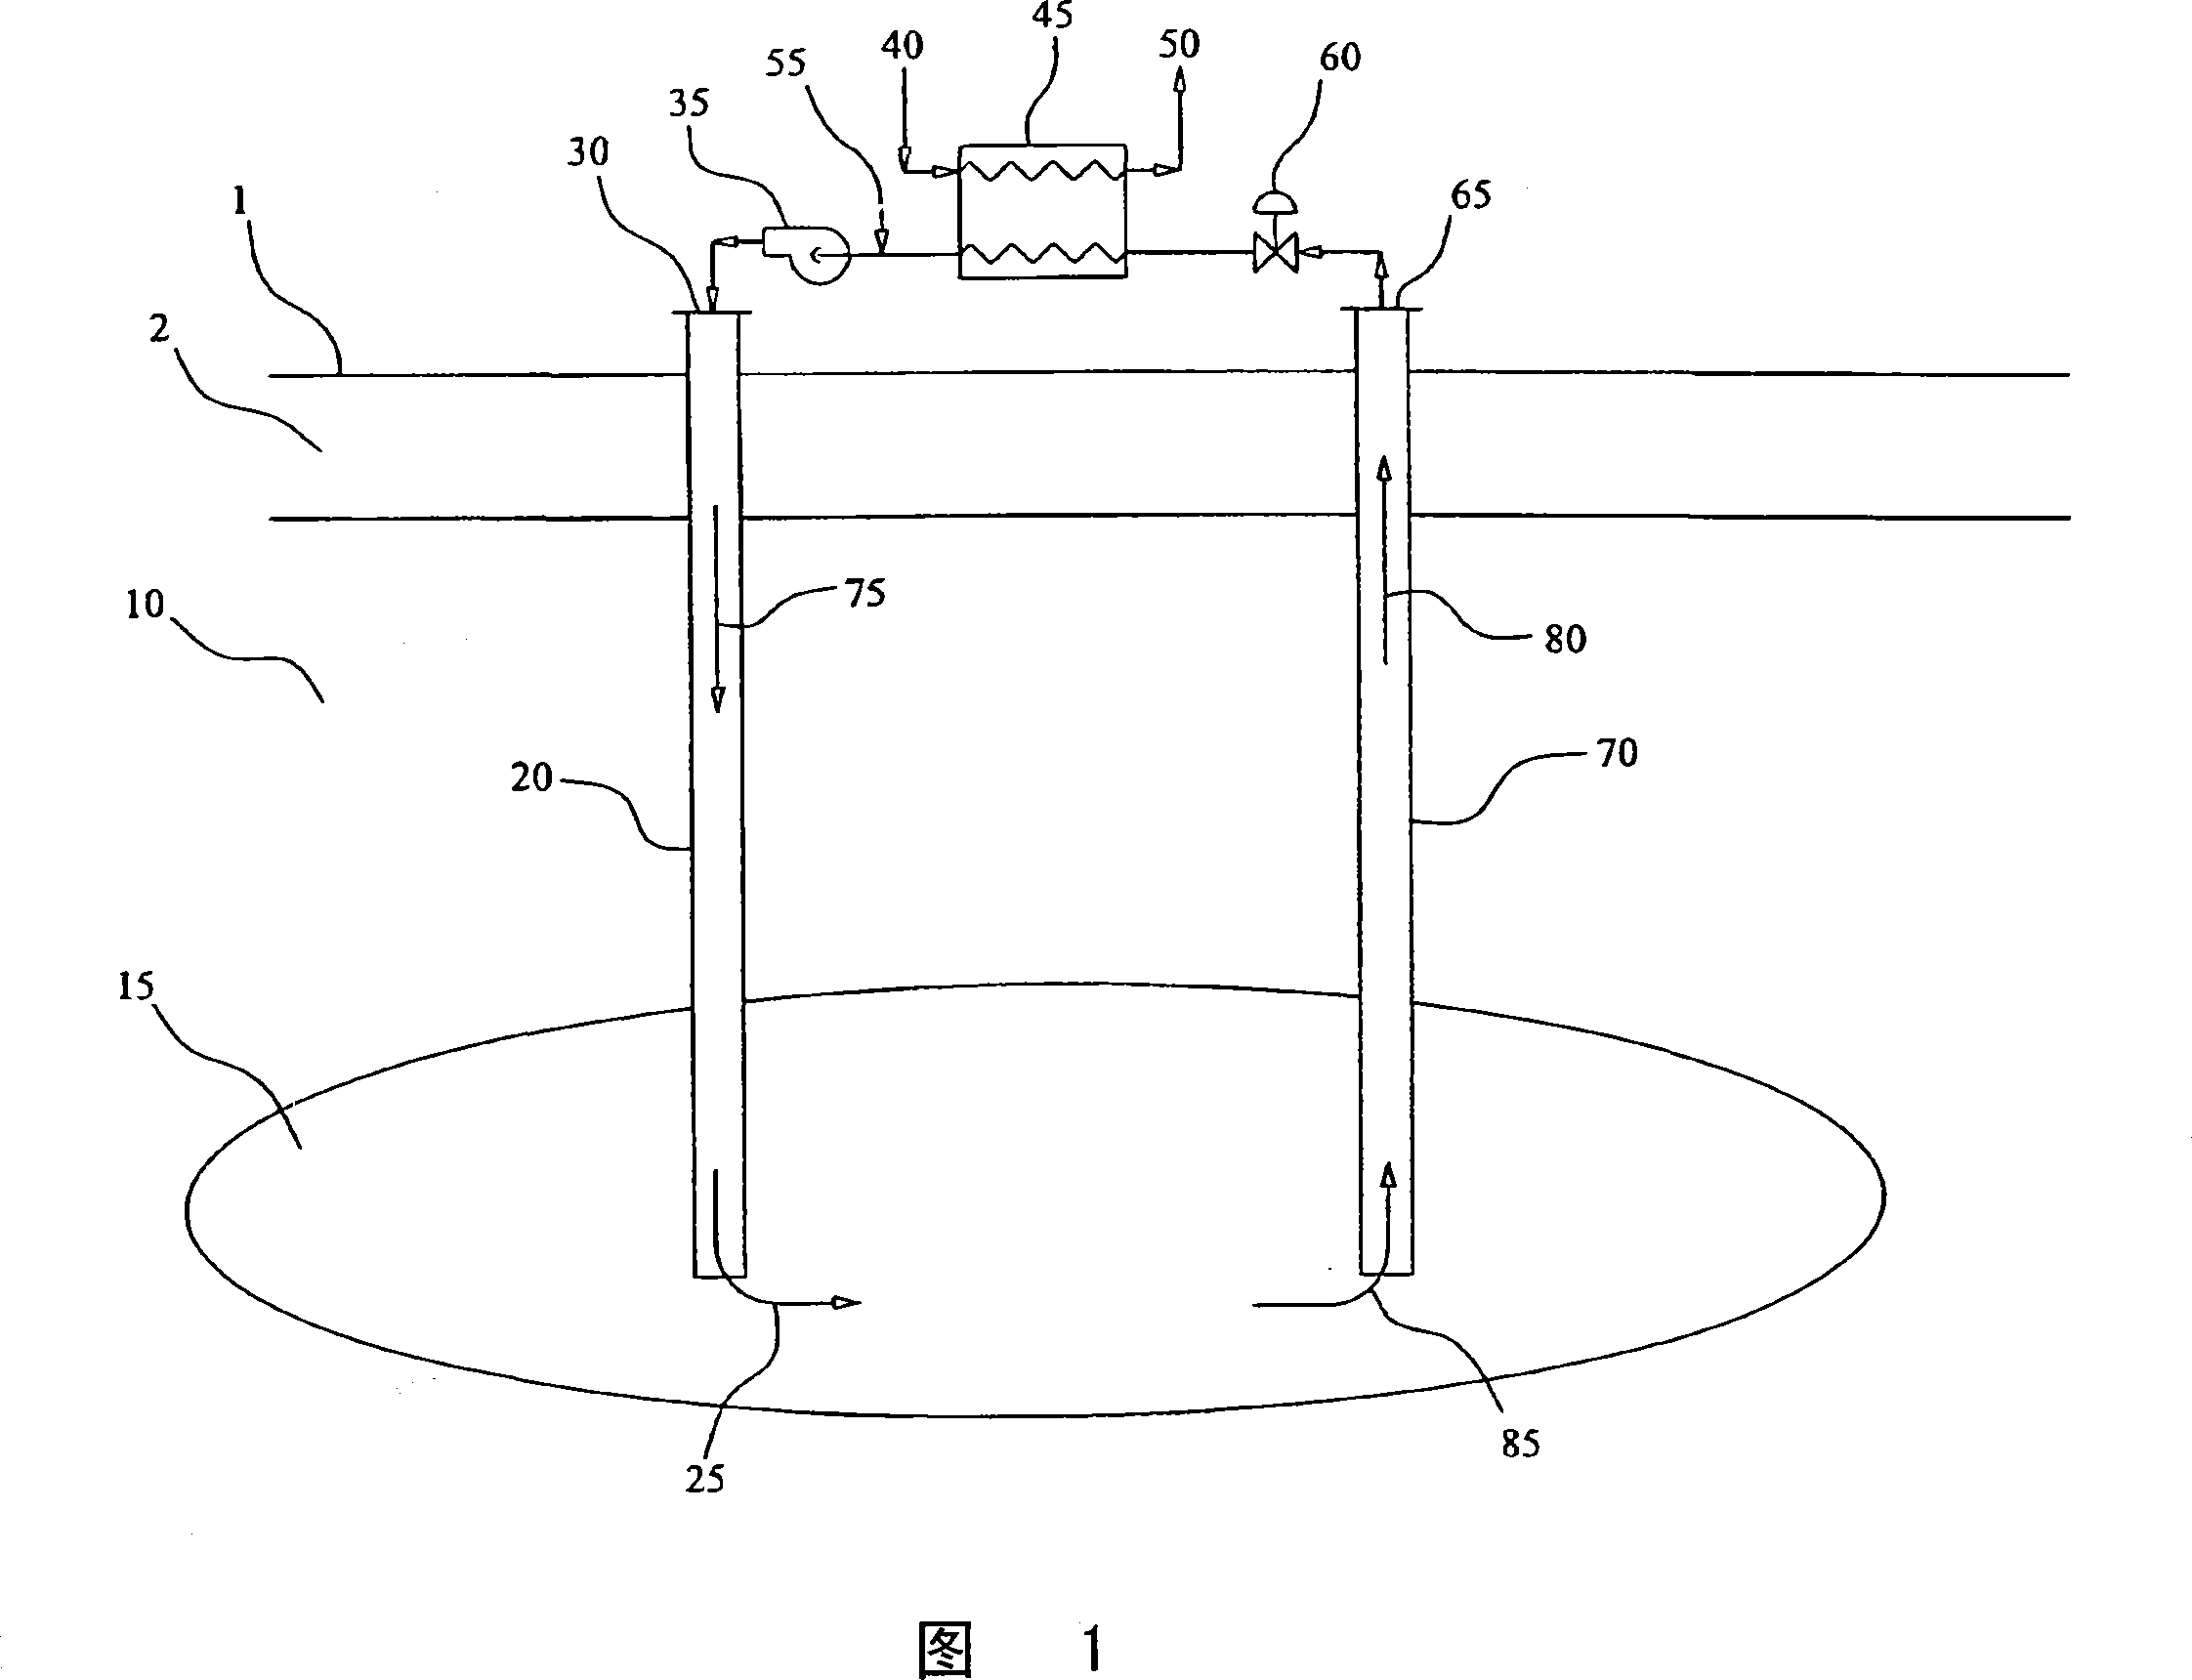 Method of developing and producing deep geothermal reservoirs